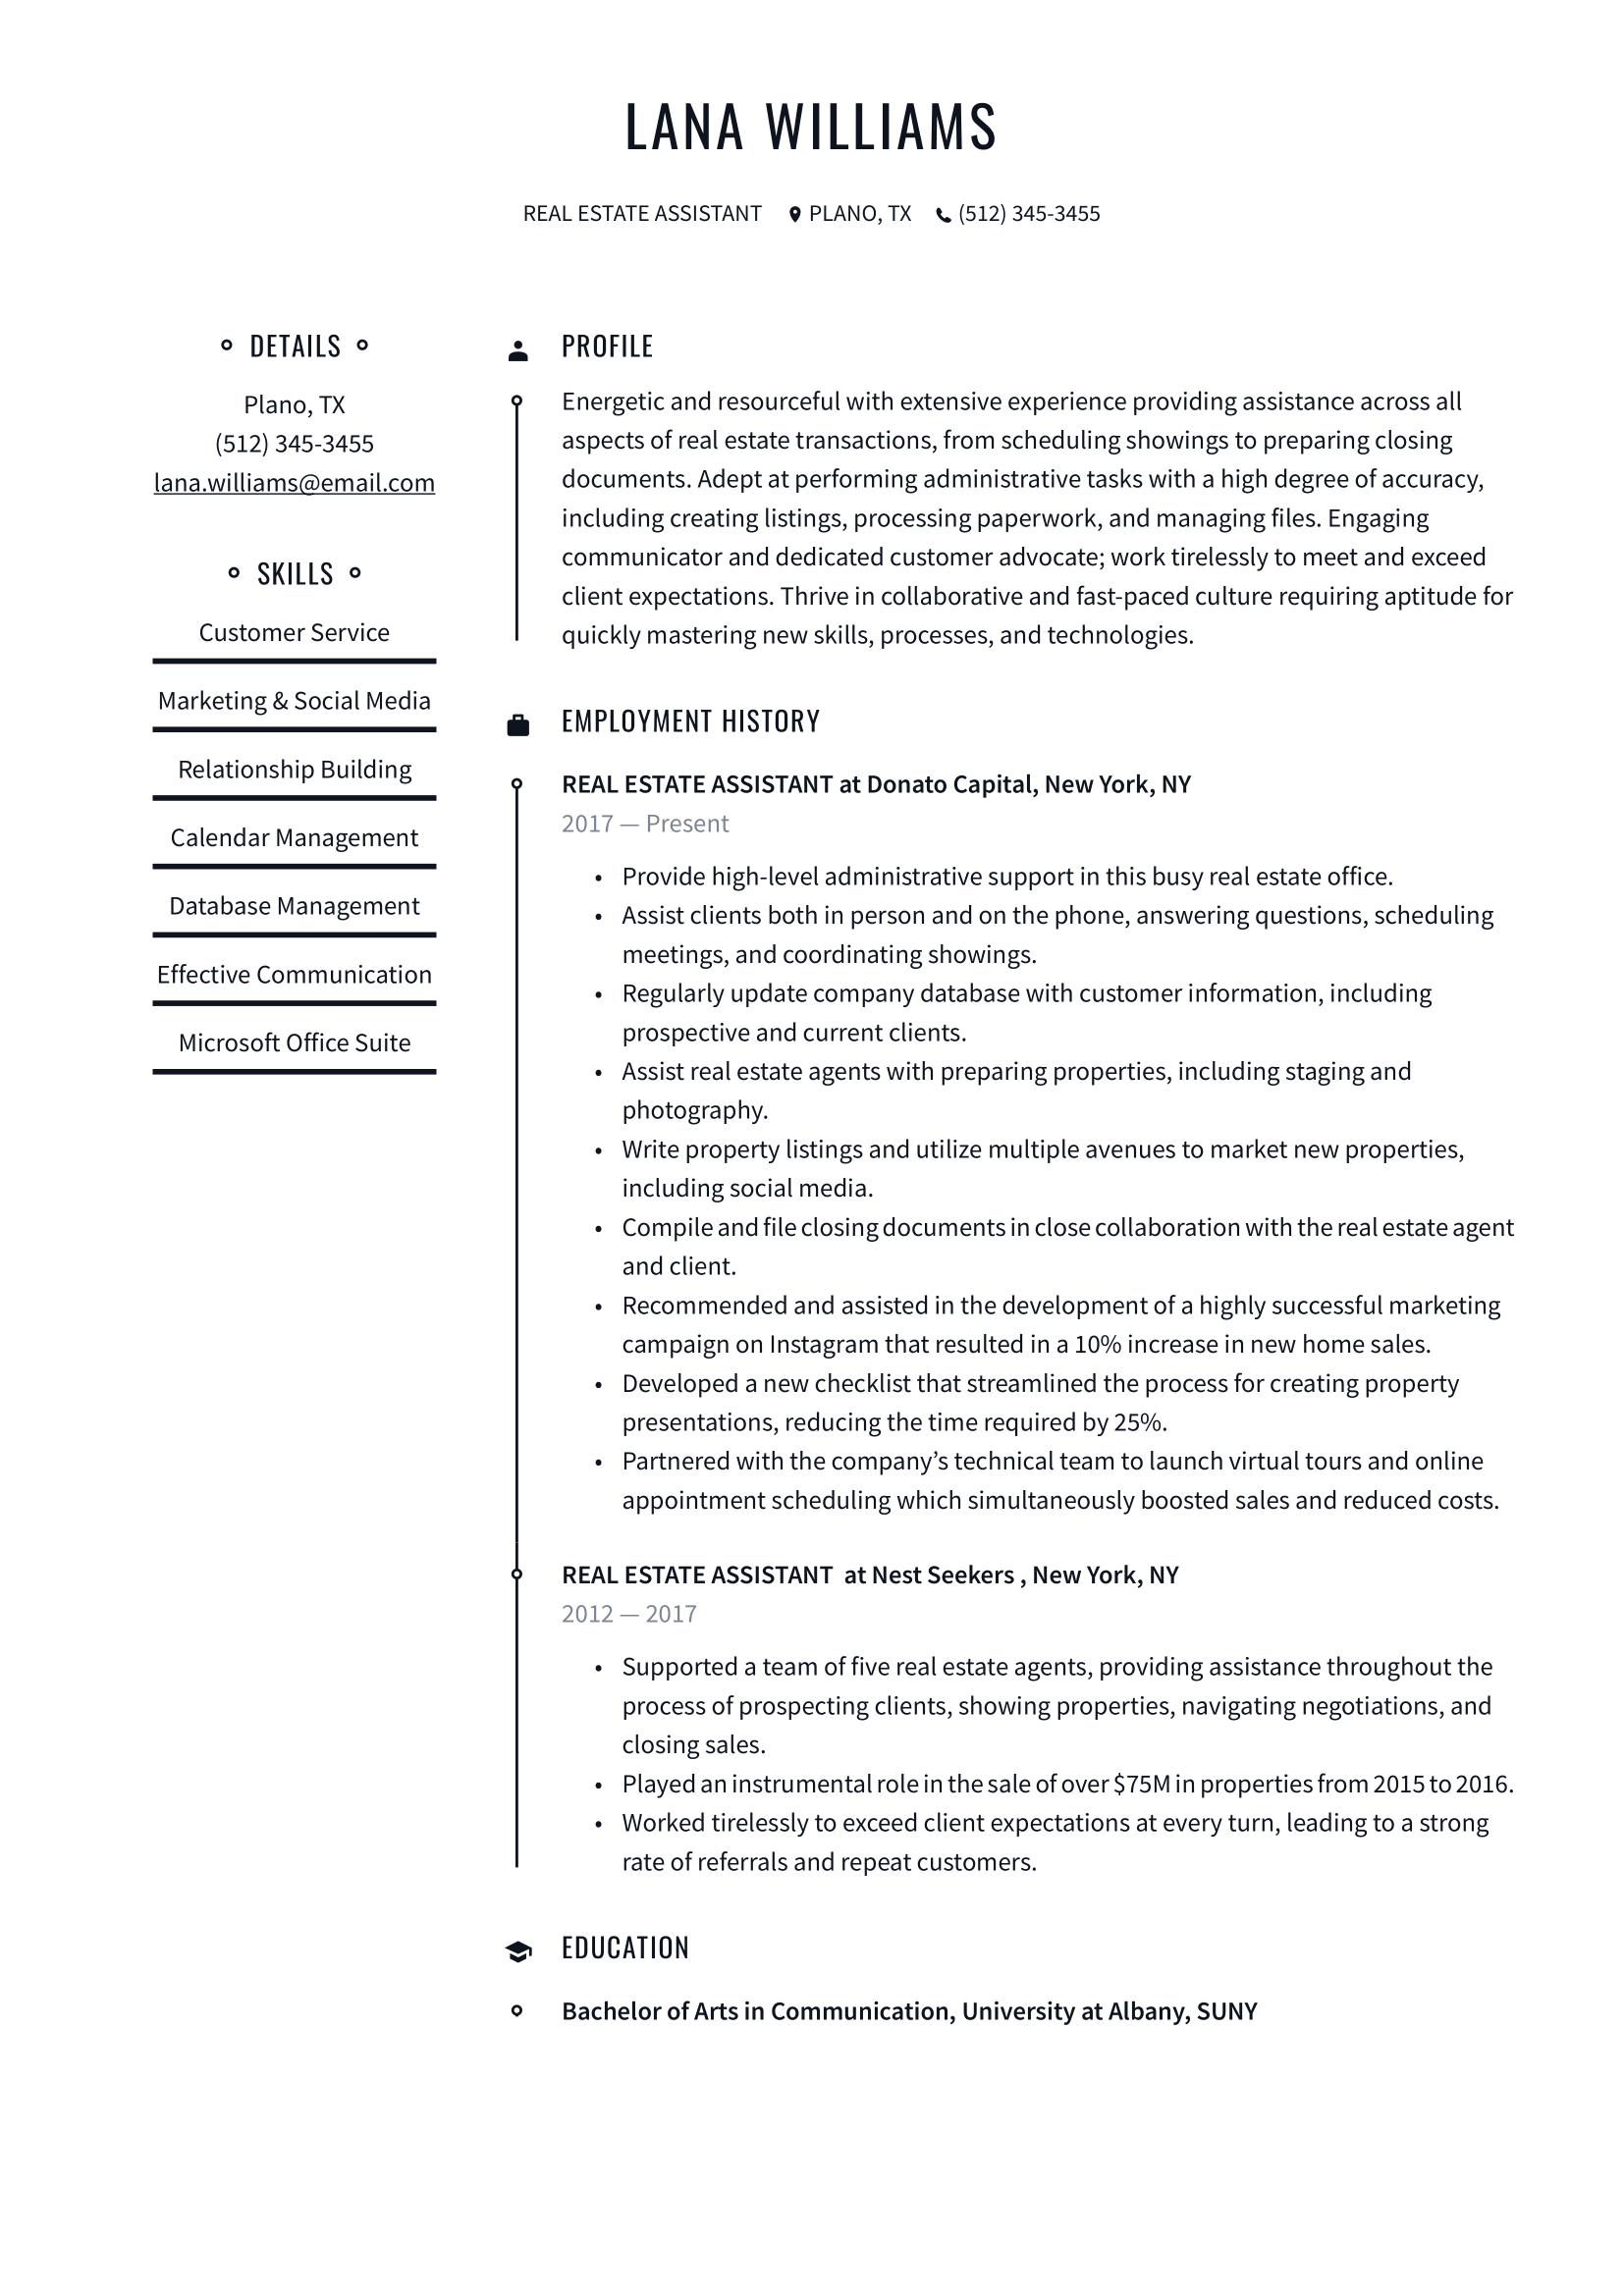 Real Estate Assistant Resume Example & Writing Guide